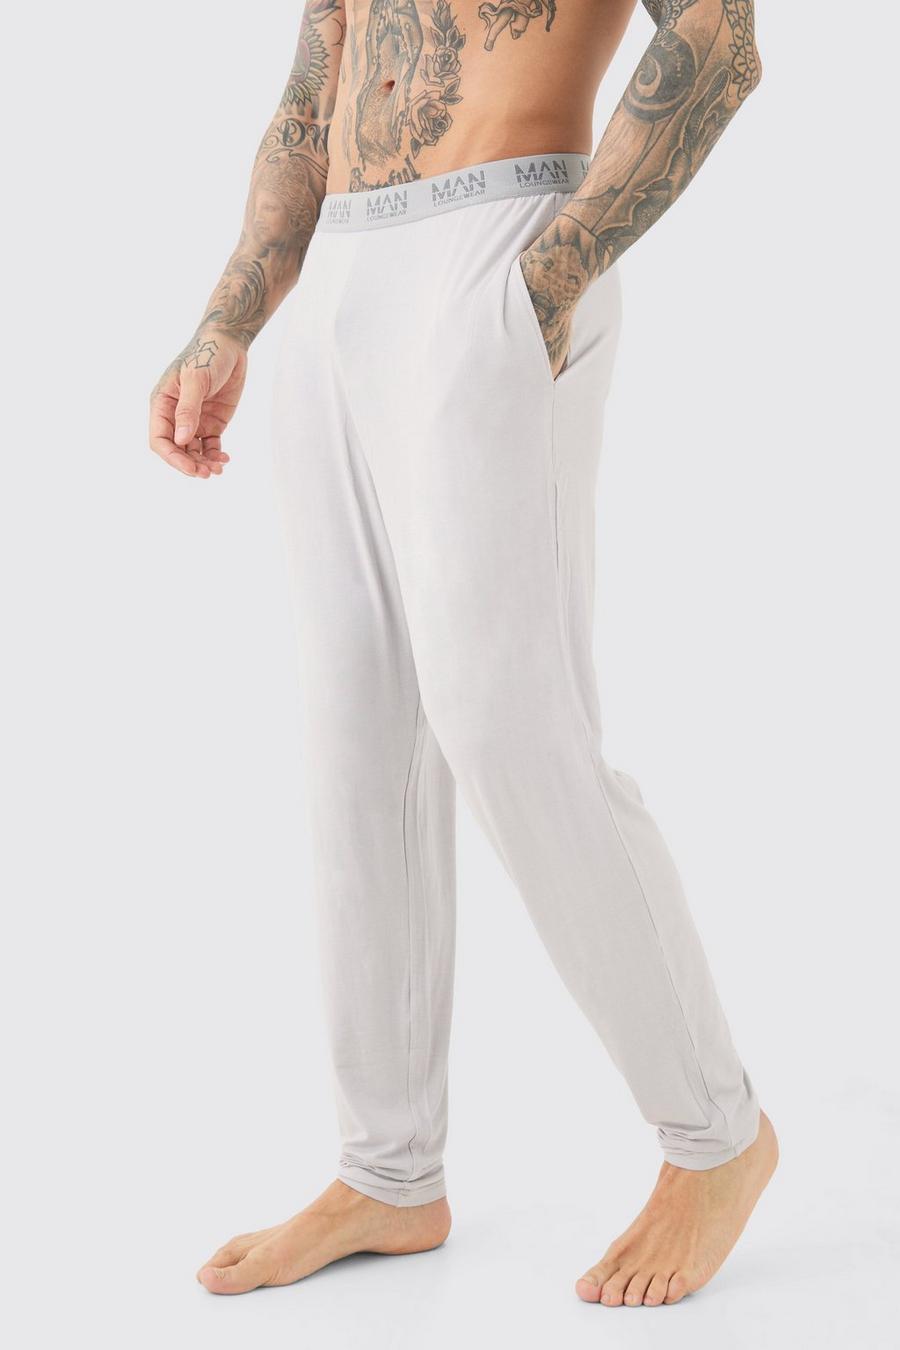 Ash grey Tall Premium Modal Mix Relaxed Fit Lounge Bottoms